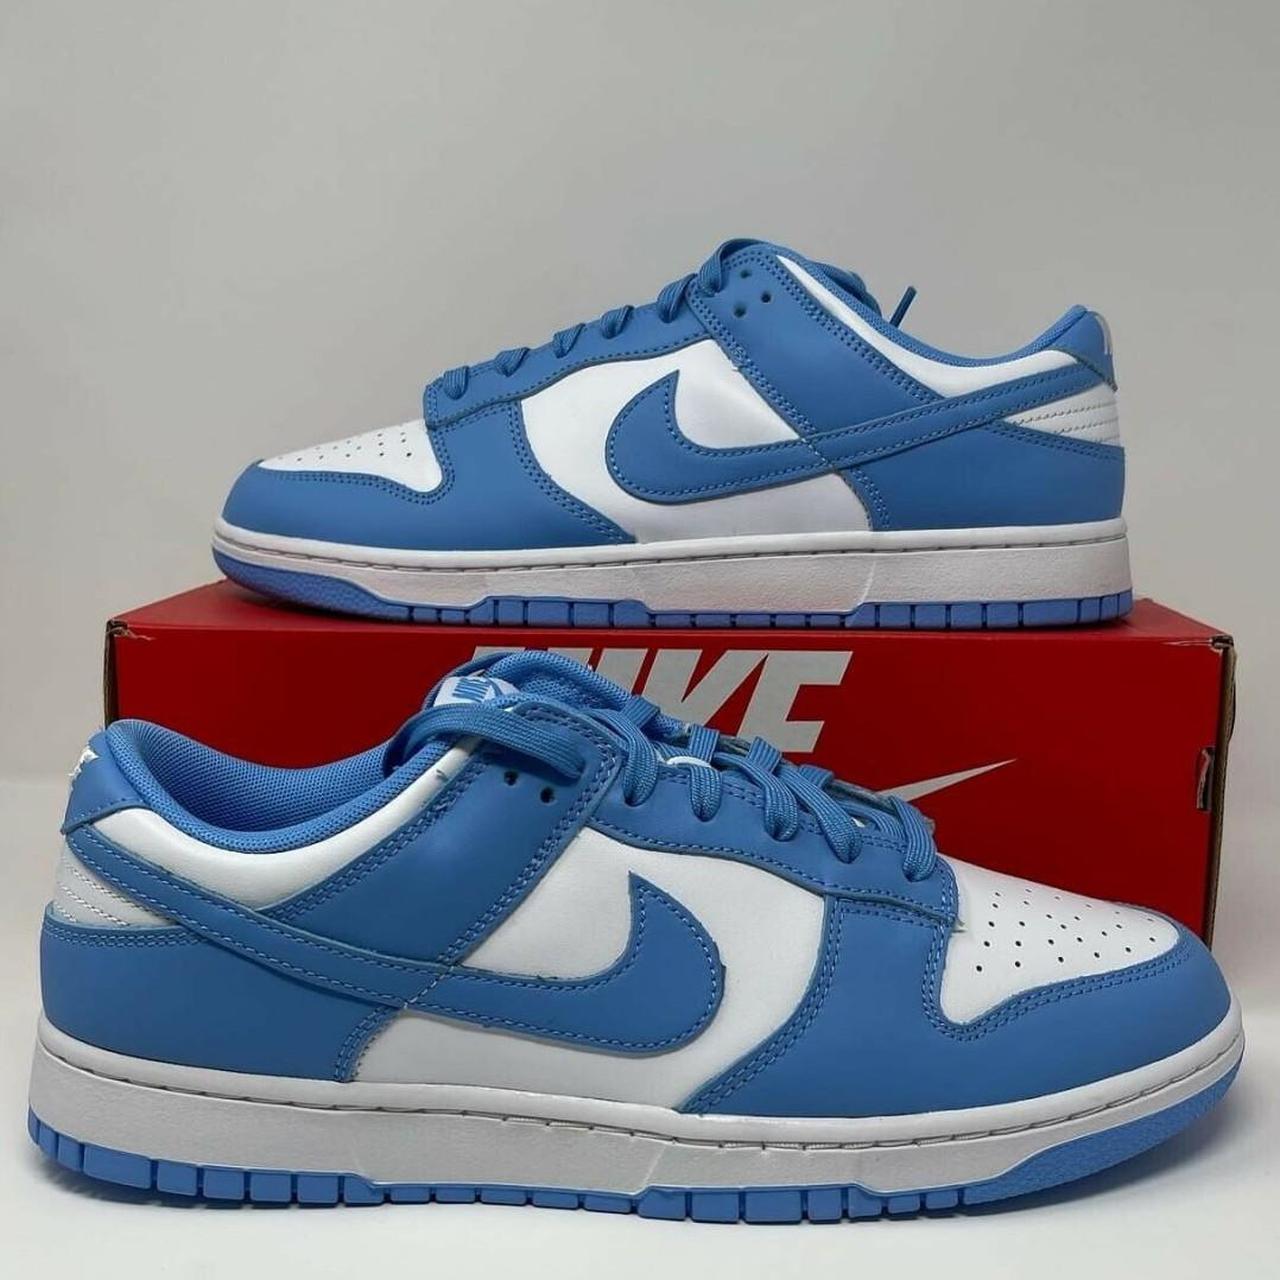 Dunk Low UNC Blue Once payment is received, item... - Depop